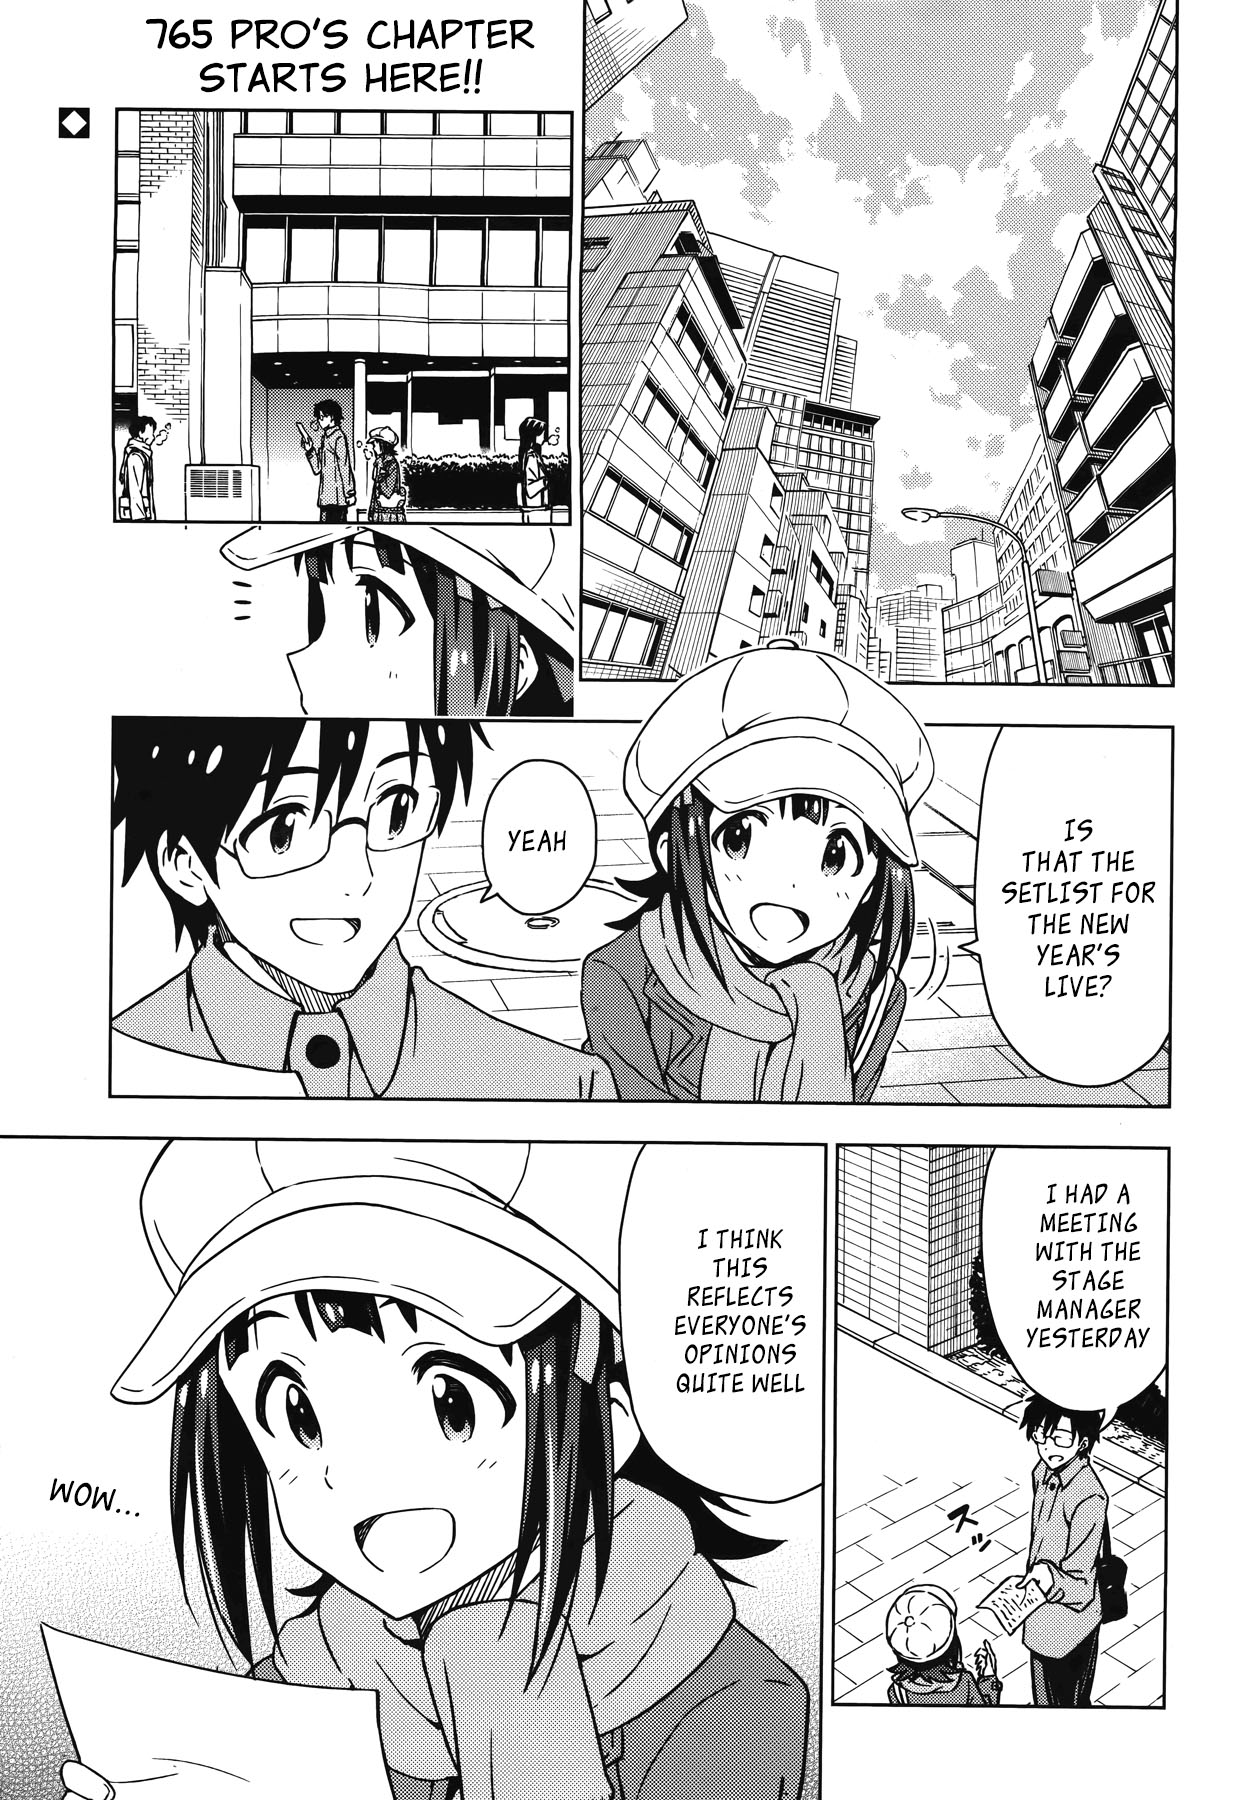 THE iDOLM@STER (Mana) Ch. 25 765pro